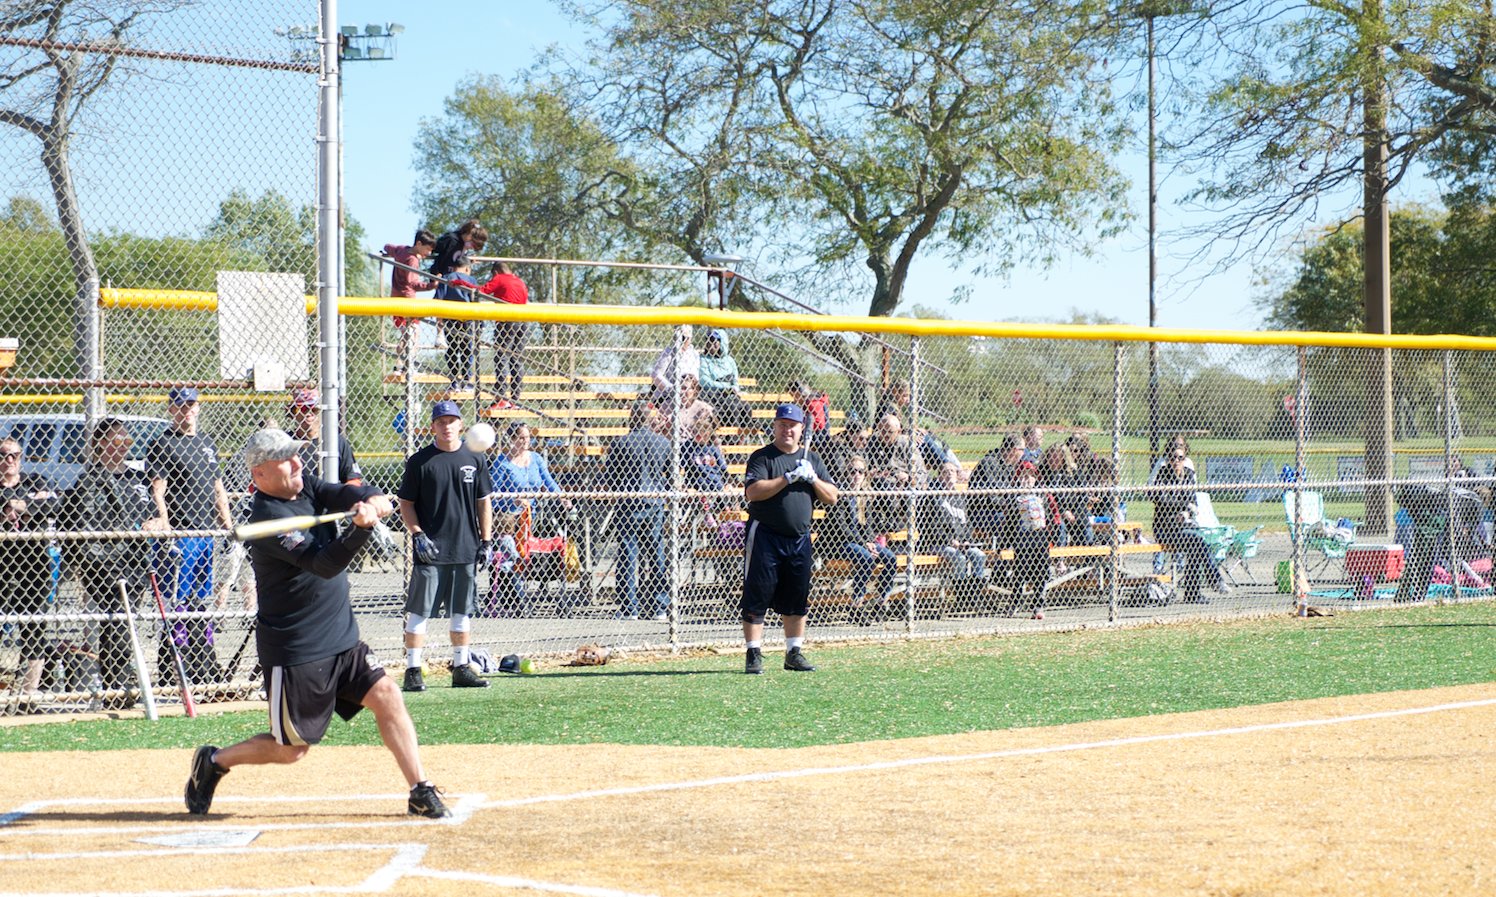 Nassau County Police Commissioner Patrick Ryder was one of many to swing for the fences at the Strikeout Suicide Charity Softball Game at Baldwin Harbor Park last weekend.